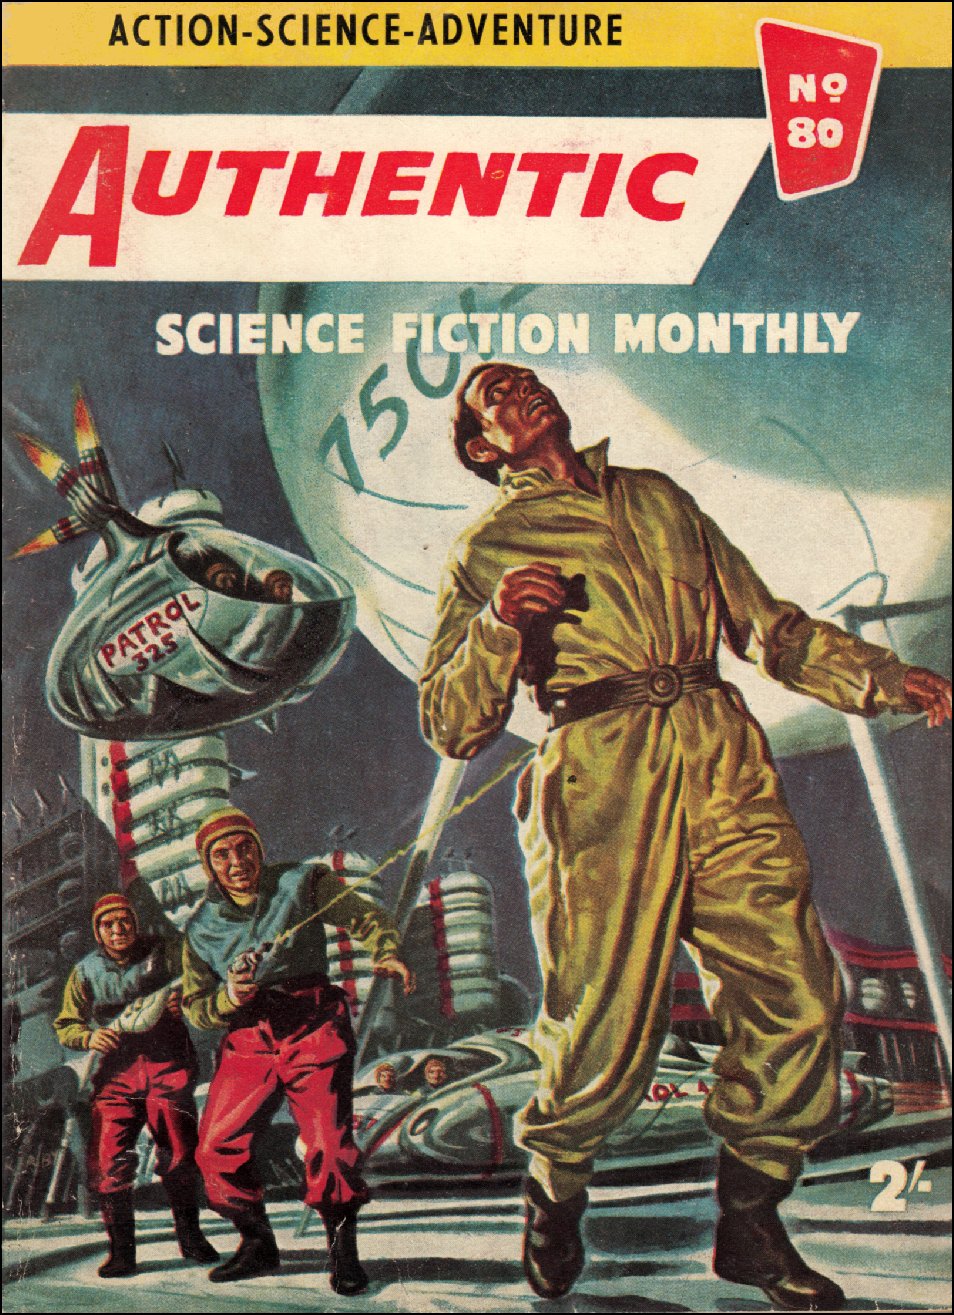 Authentic Science Fiction Monthly Number 80